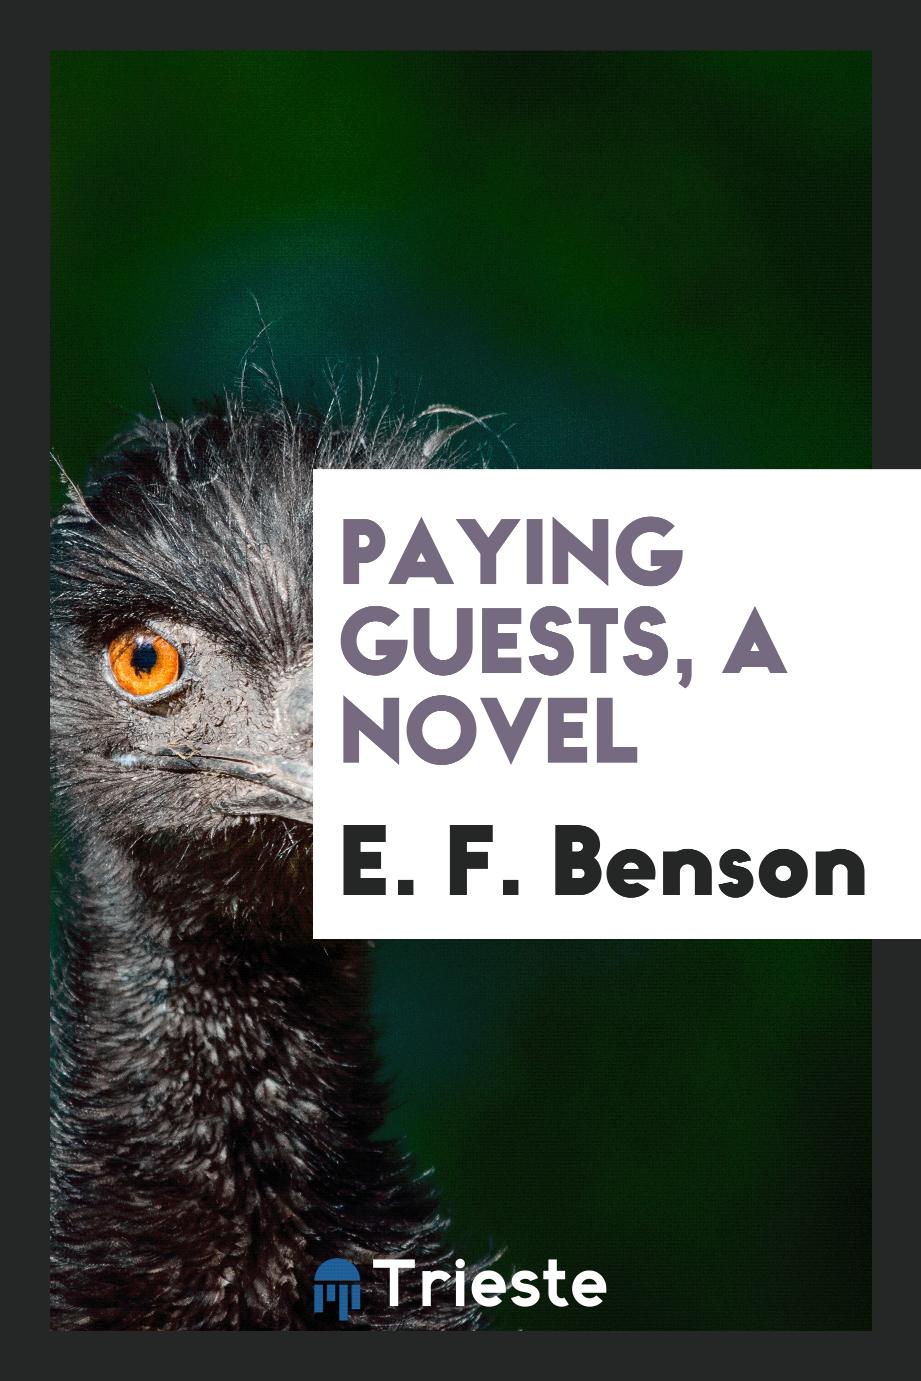 Paying Guests, a Novel